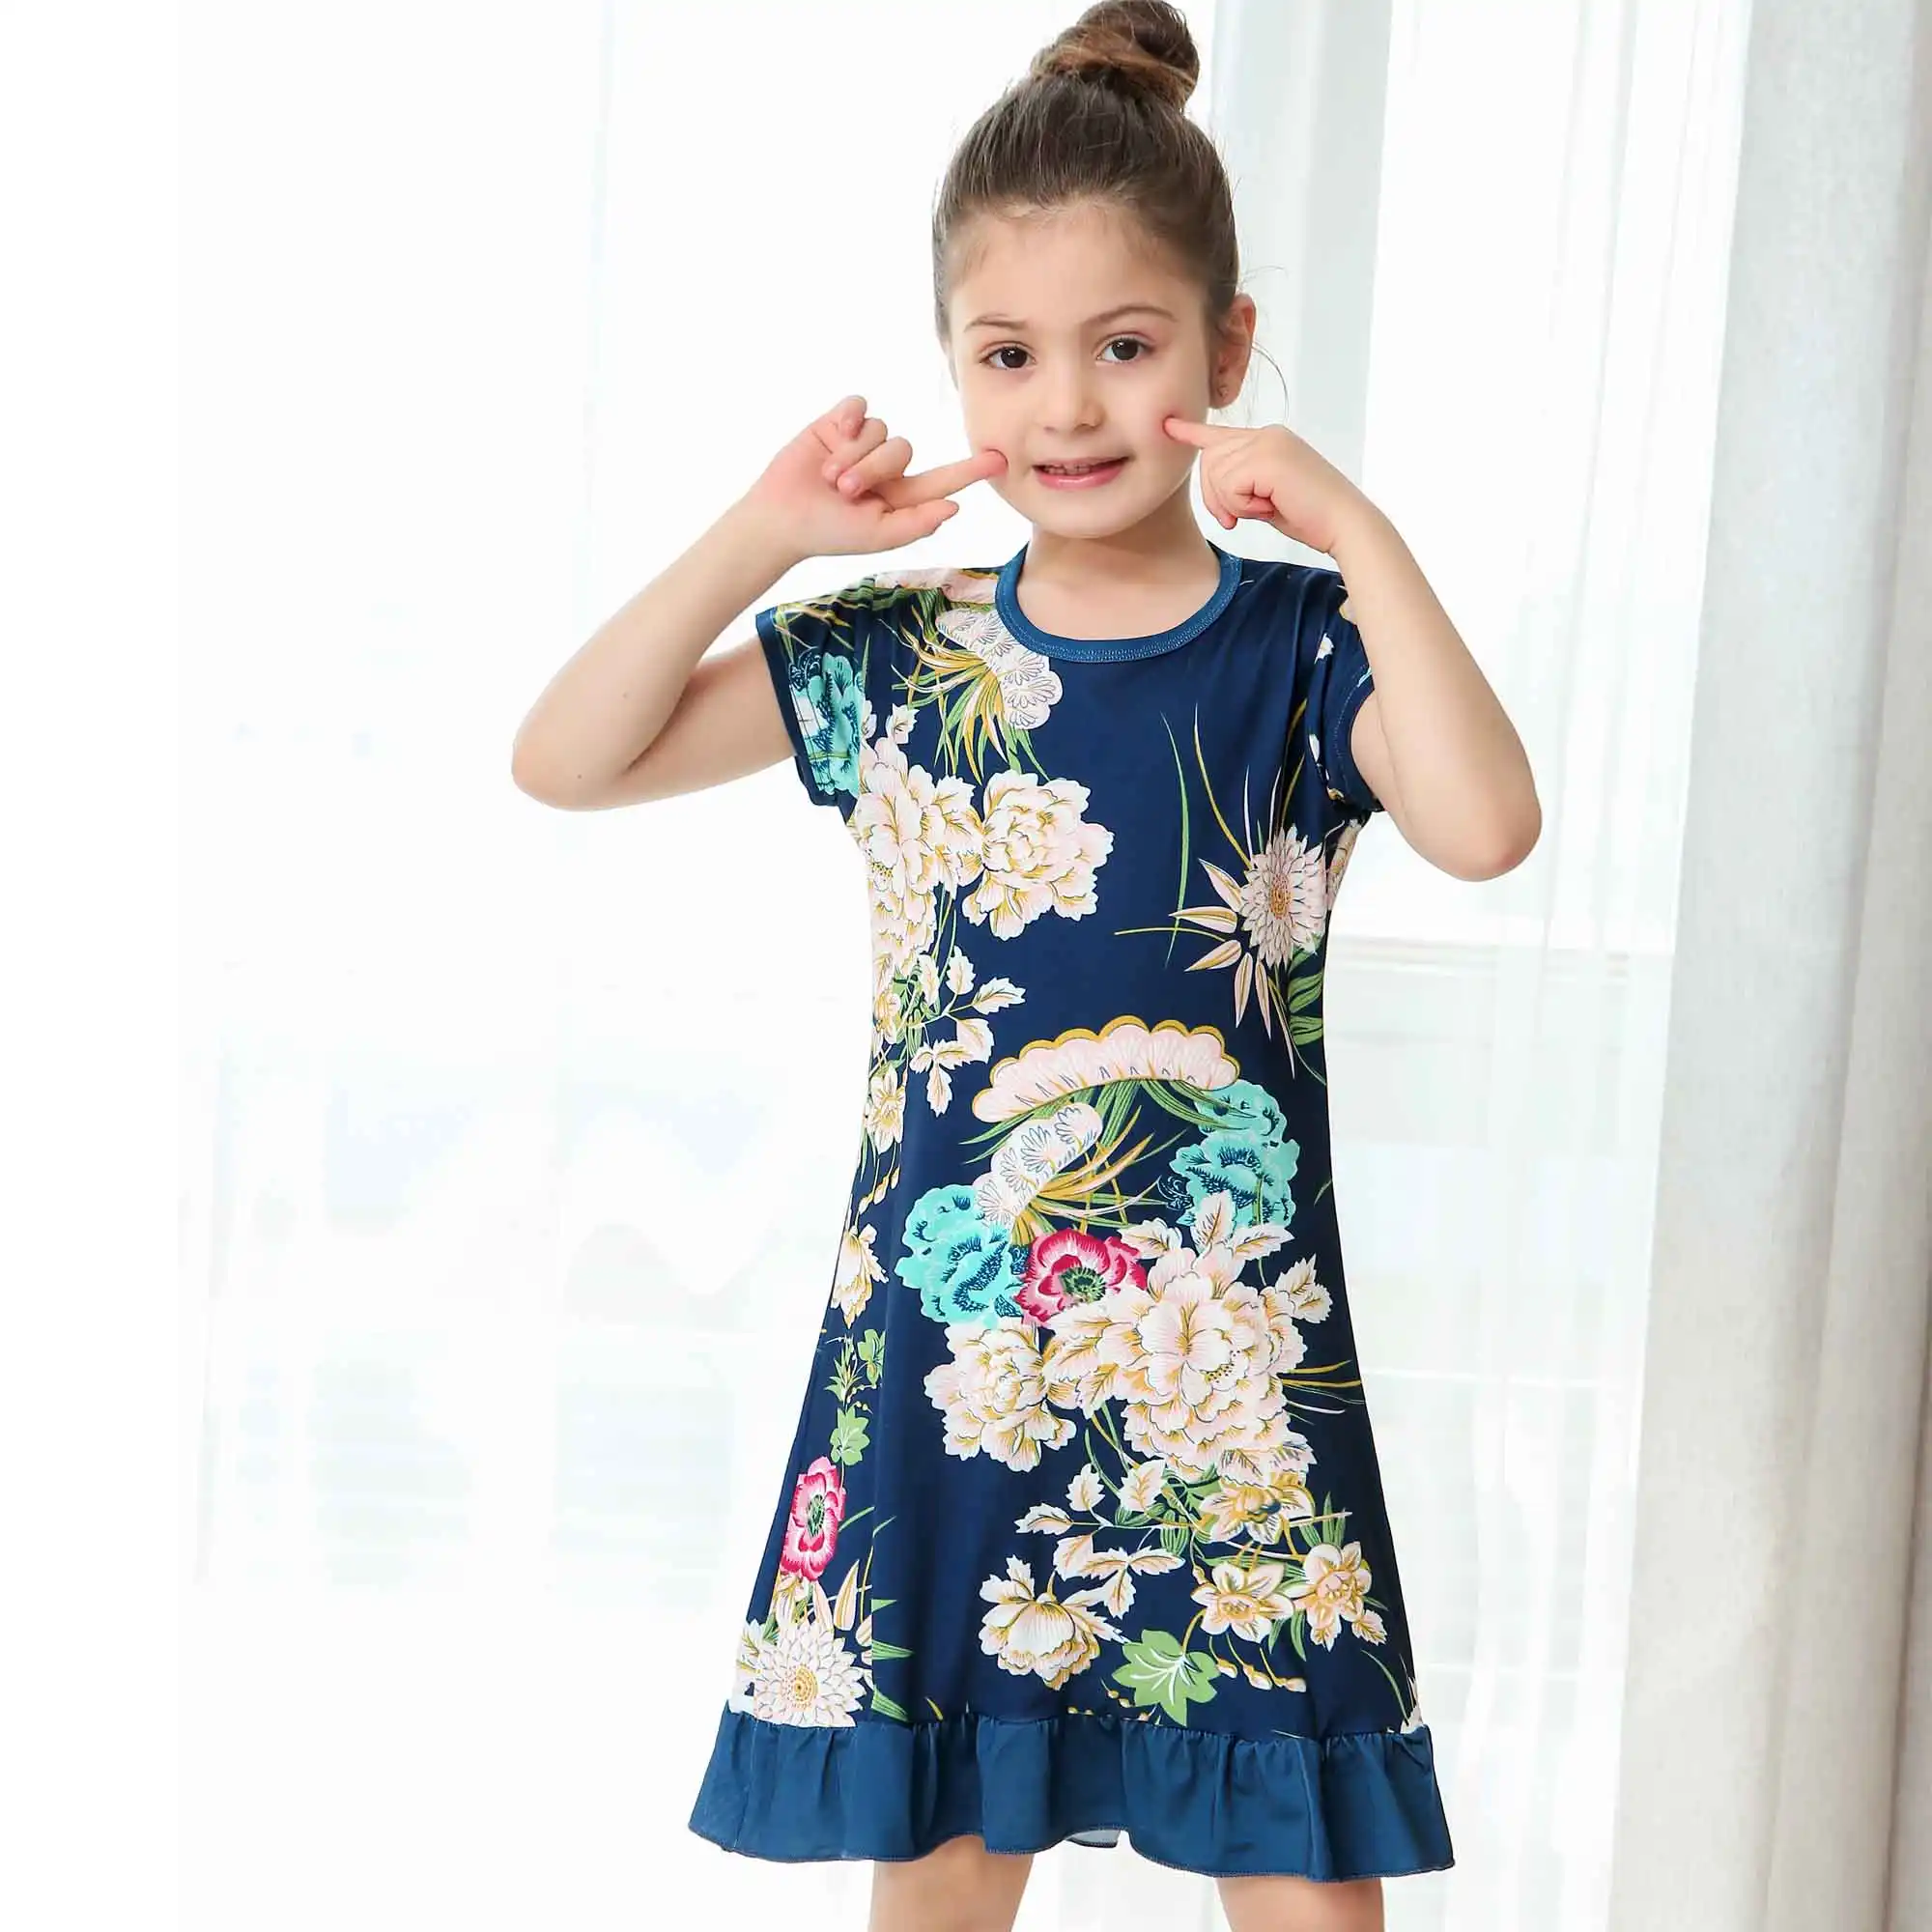 Cute Ins Toddler Baby Girl Kid Flower Print Princess Party Dress Outfits Clothes